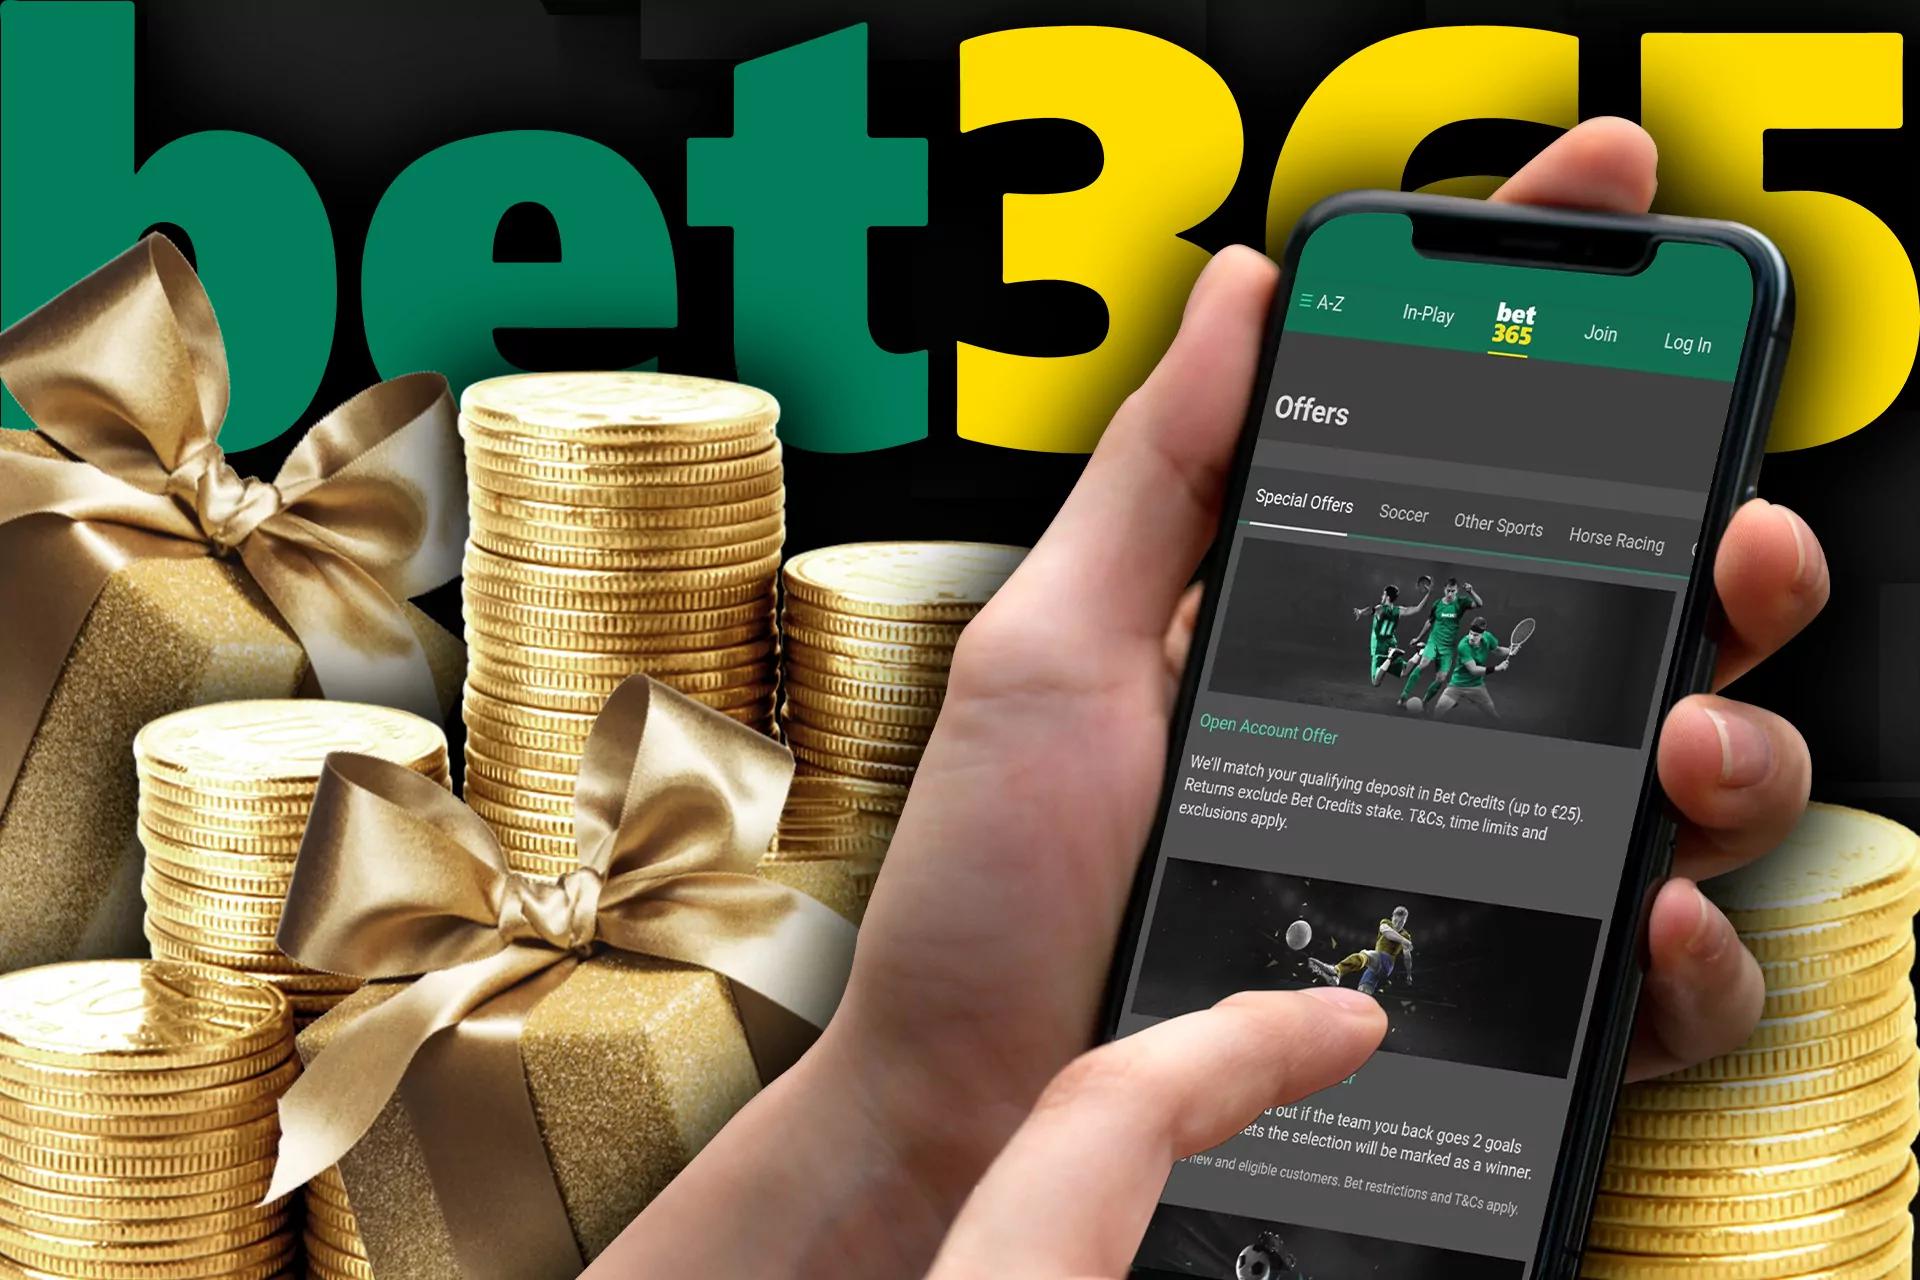 The bet365 team developed a great app for Android and iOS devices, at which you can place bets and follow bonus programs.